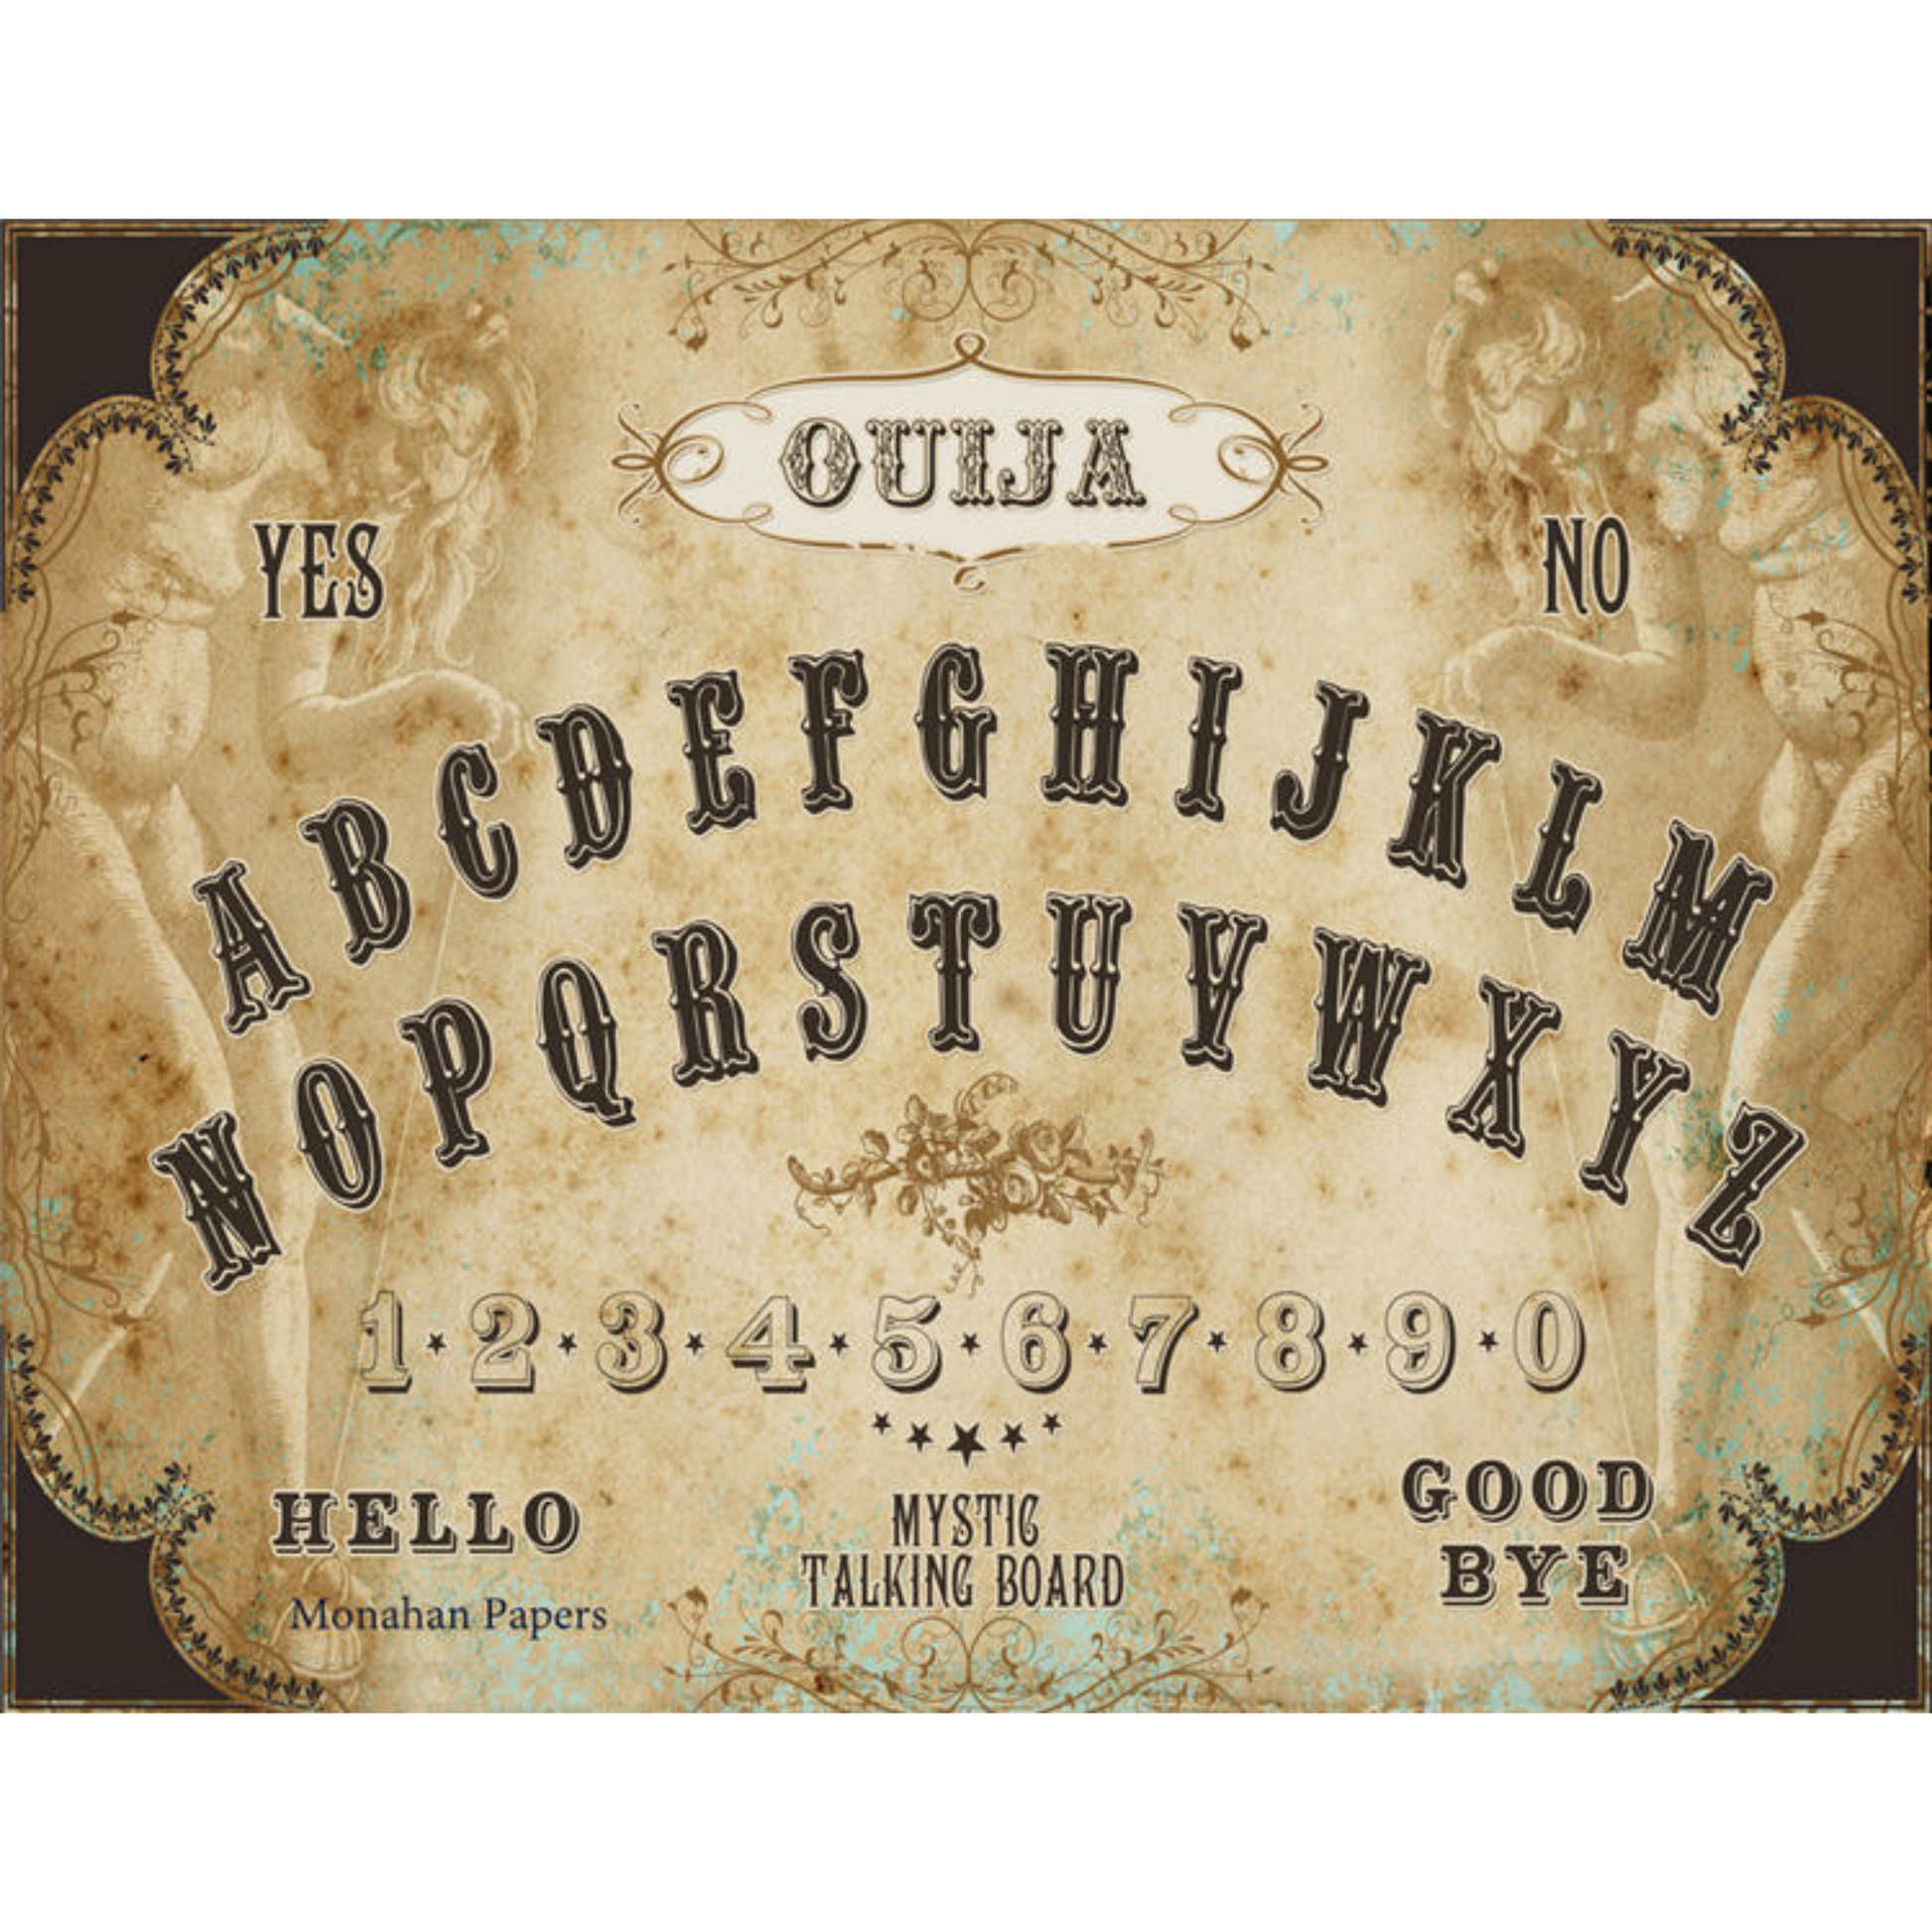 "Ouija Board" decoupage paper by Monahan Papers. Size 11" x  17" available at Milton's Daughter.